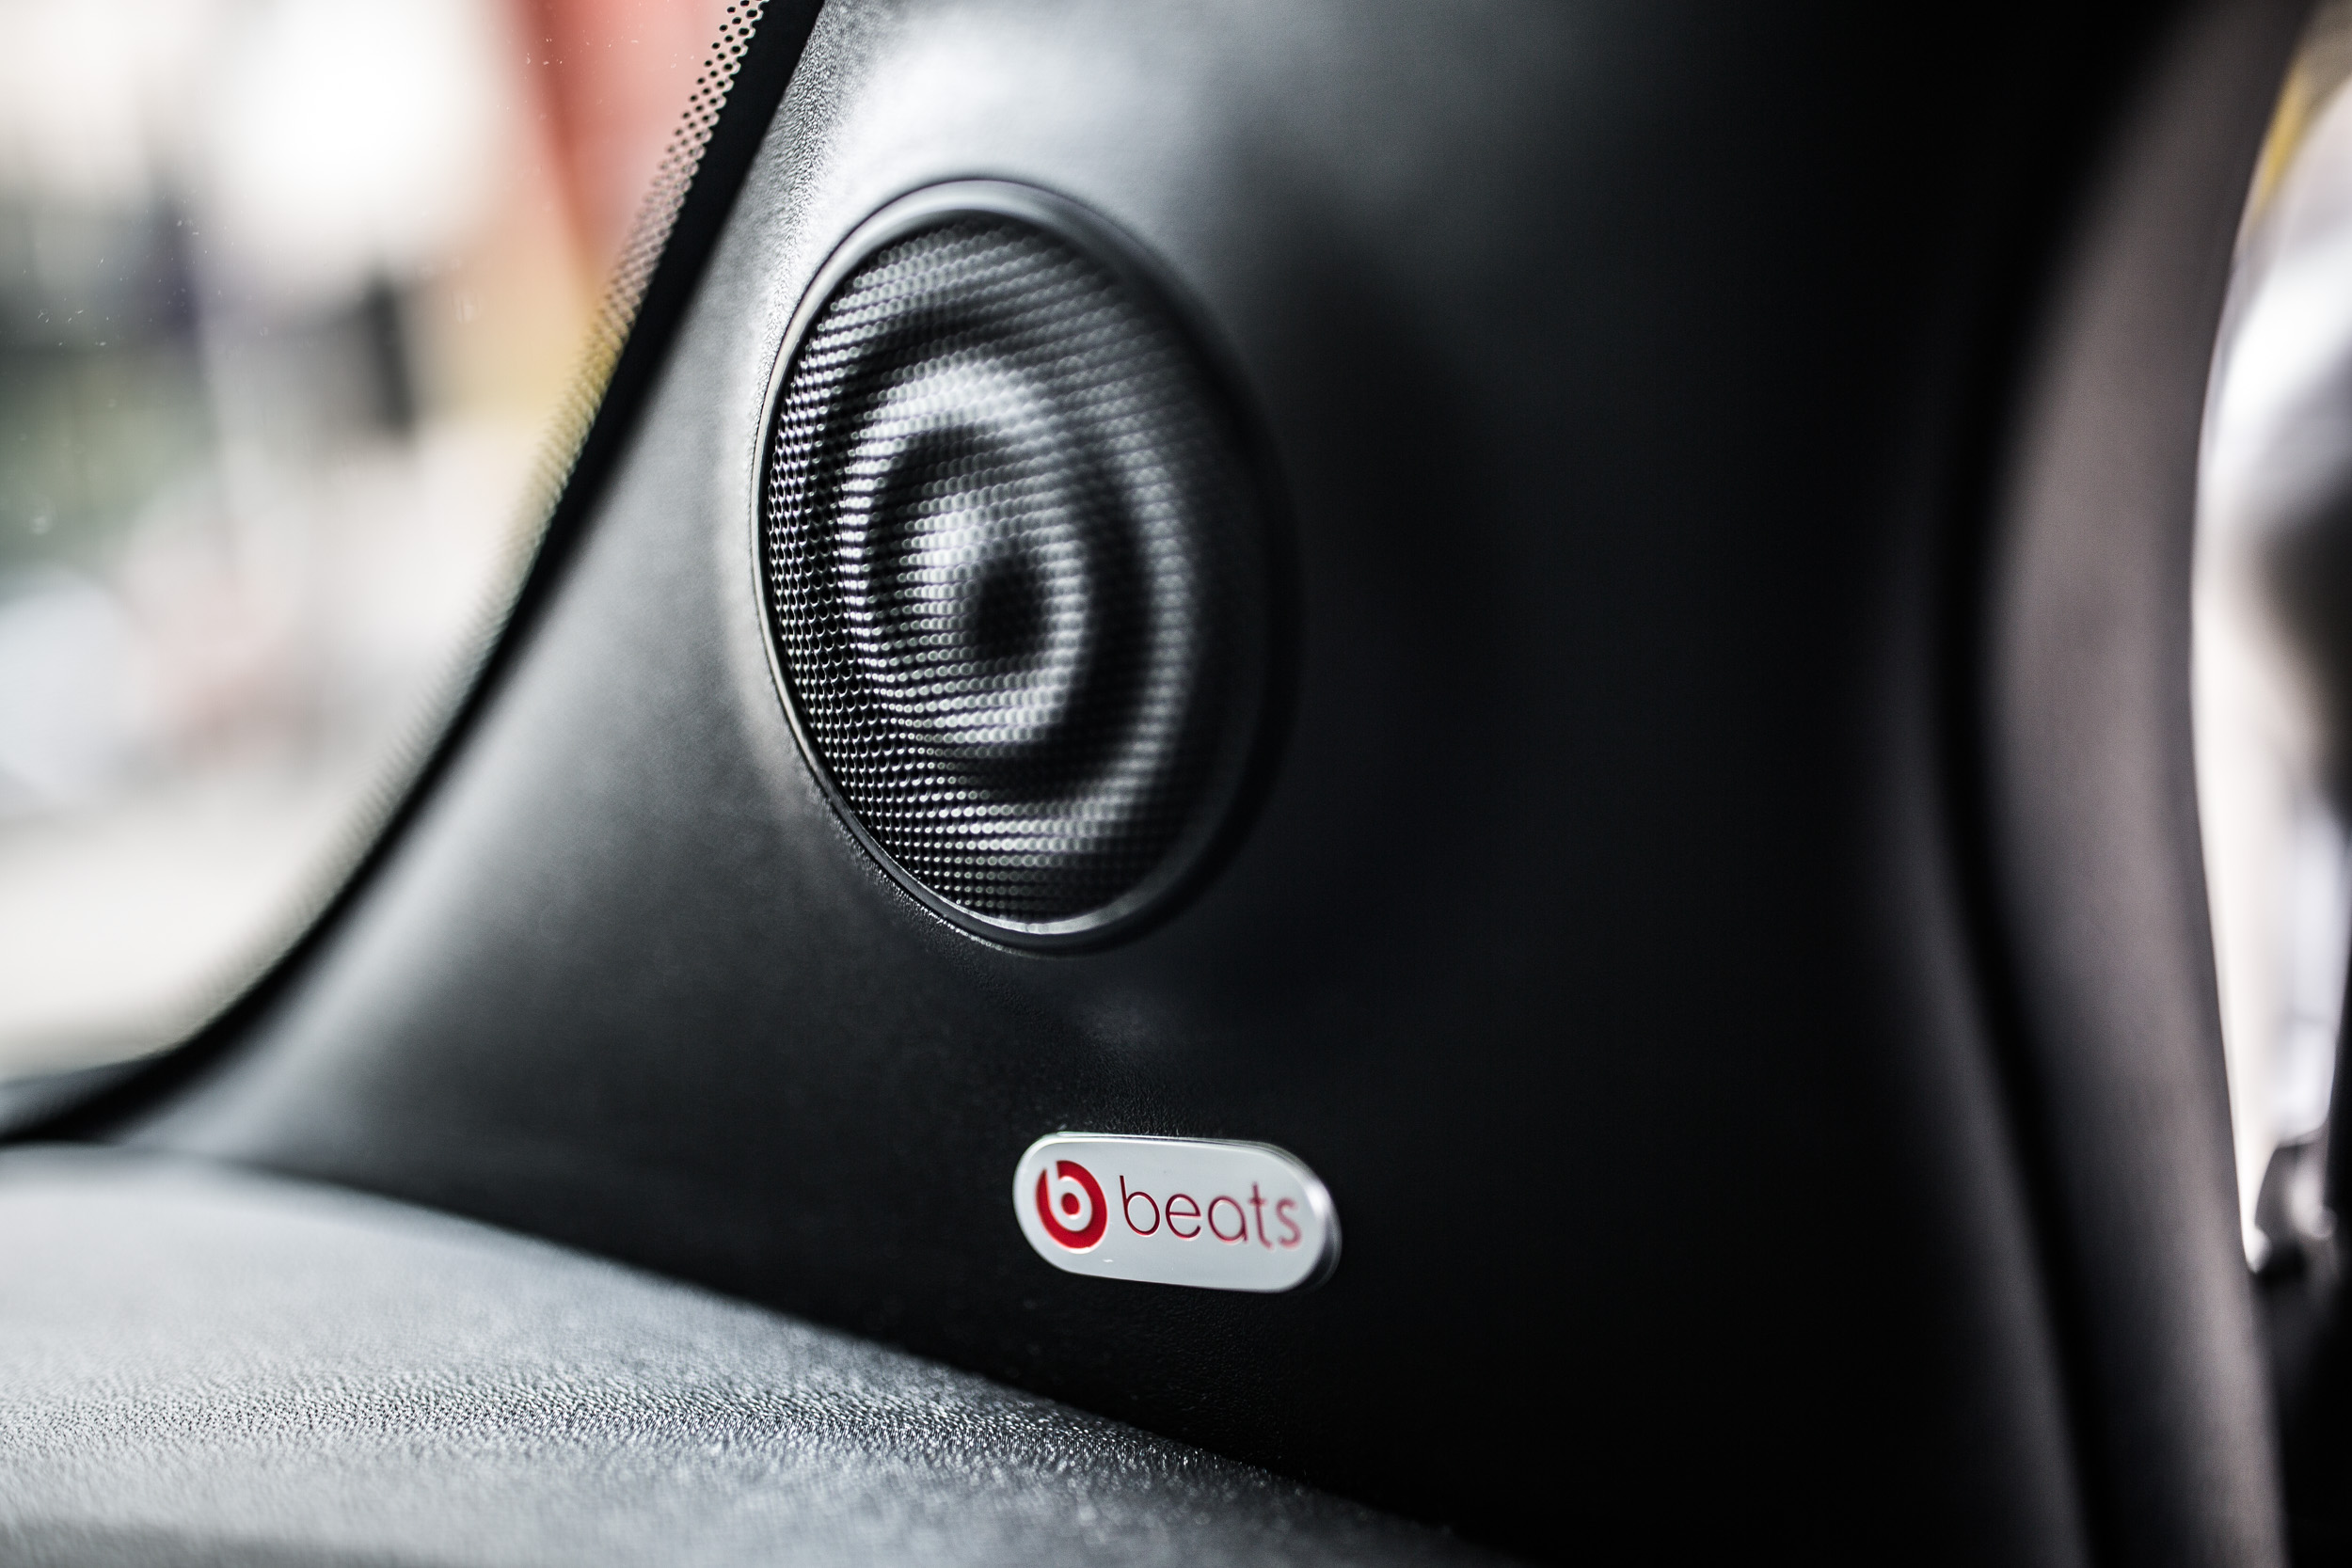 Beats audio system inside the Fiat 500S